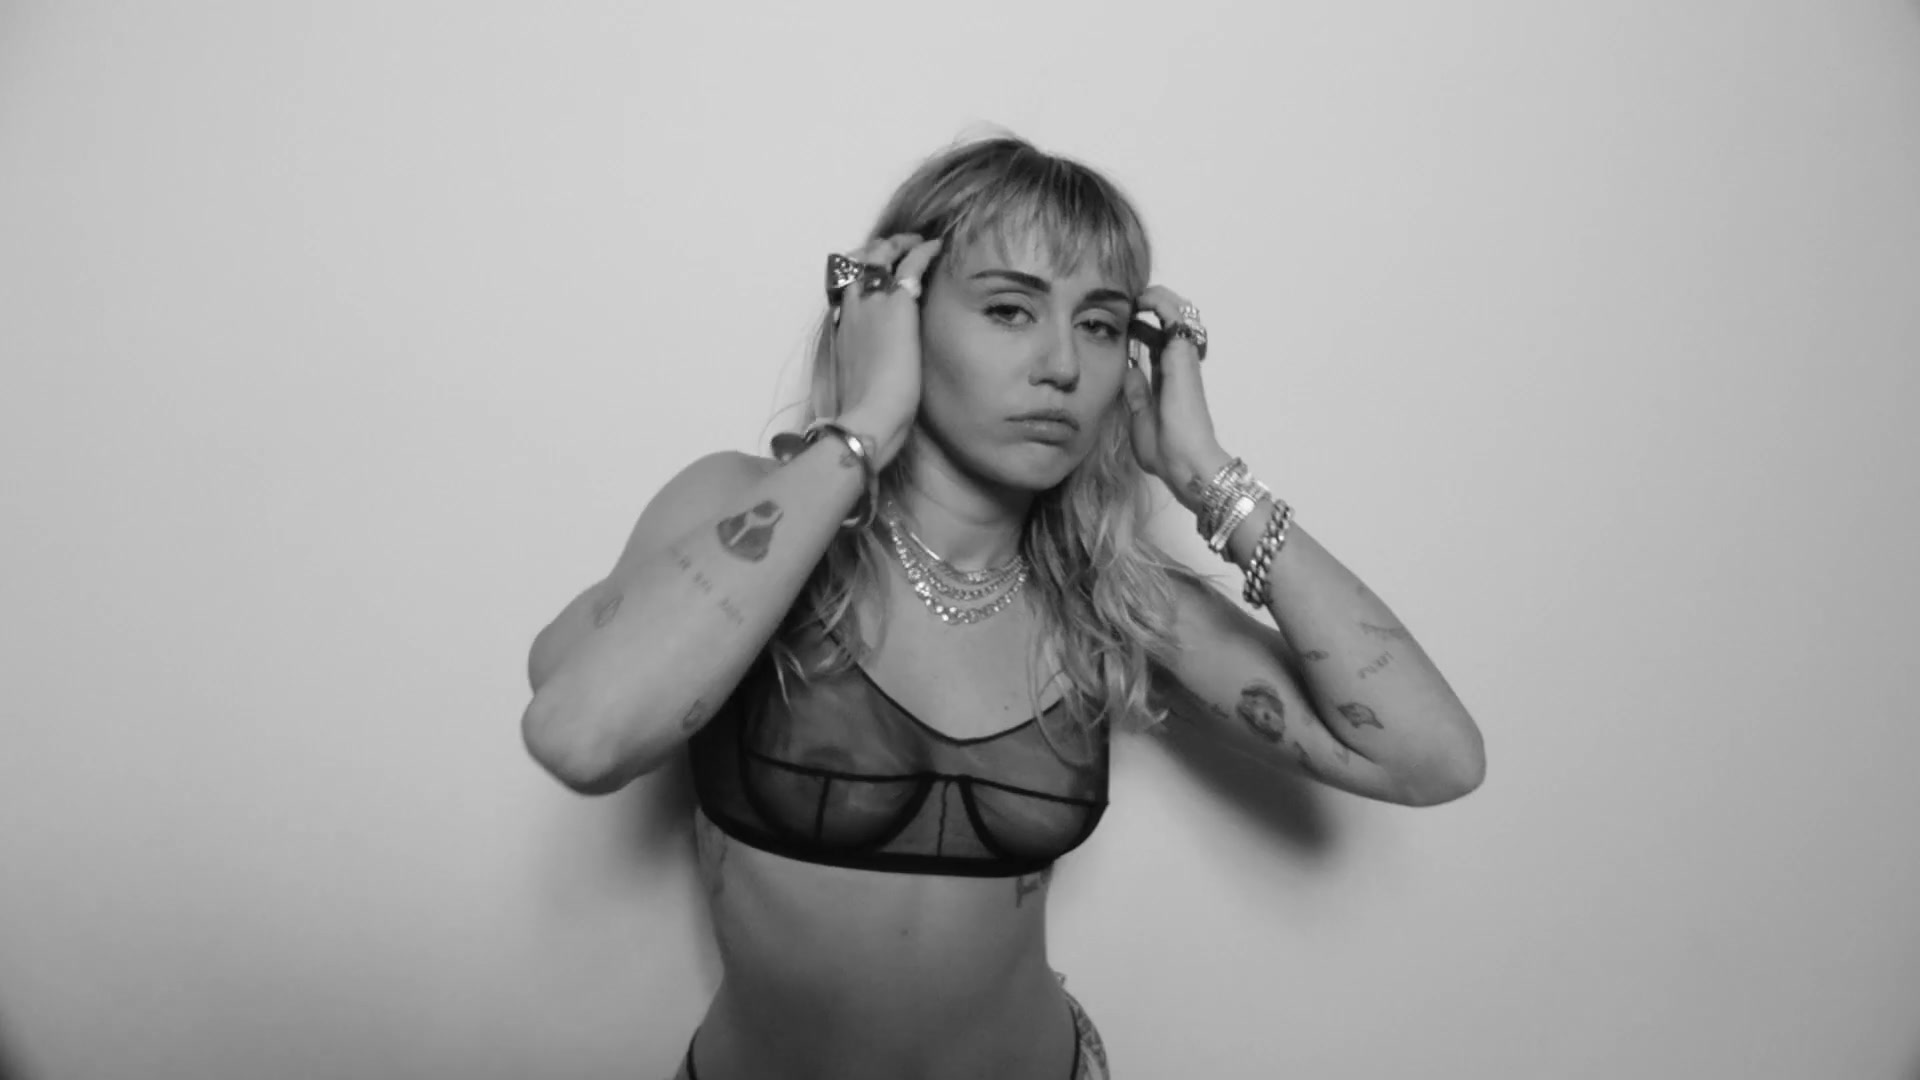 Miley Cyrus Monochrome Wallpapers